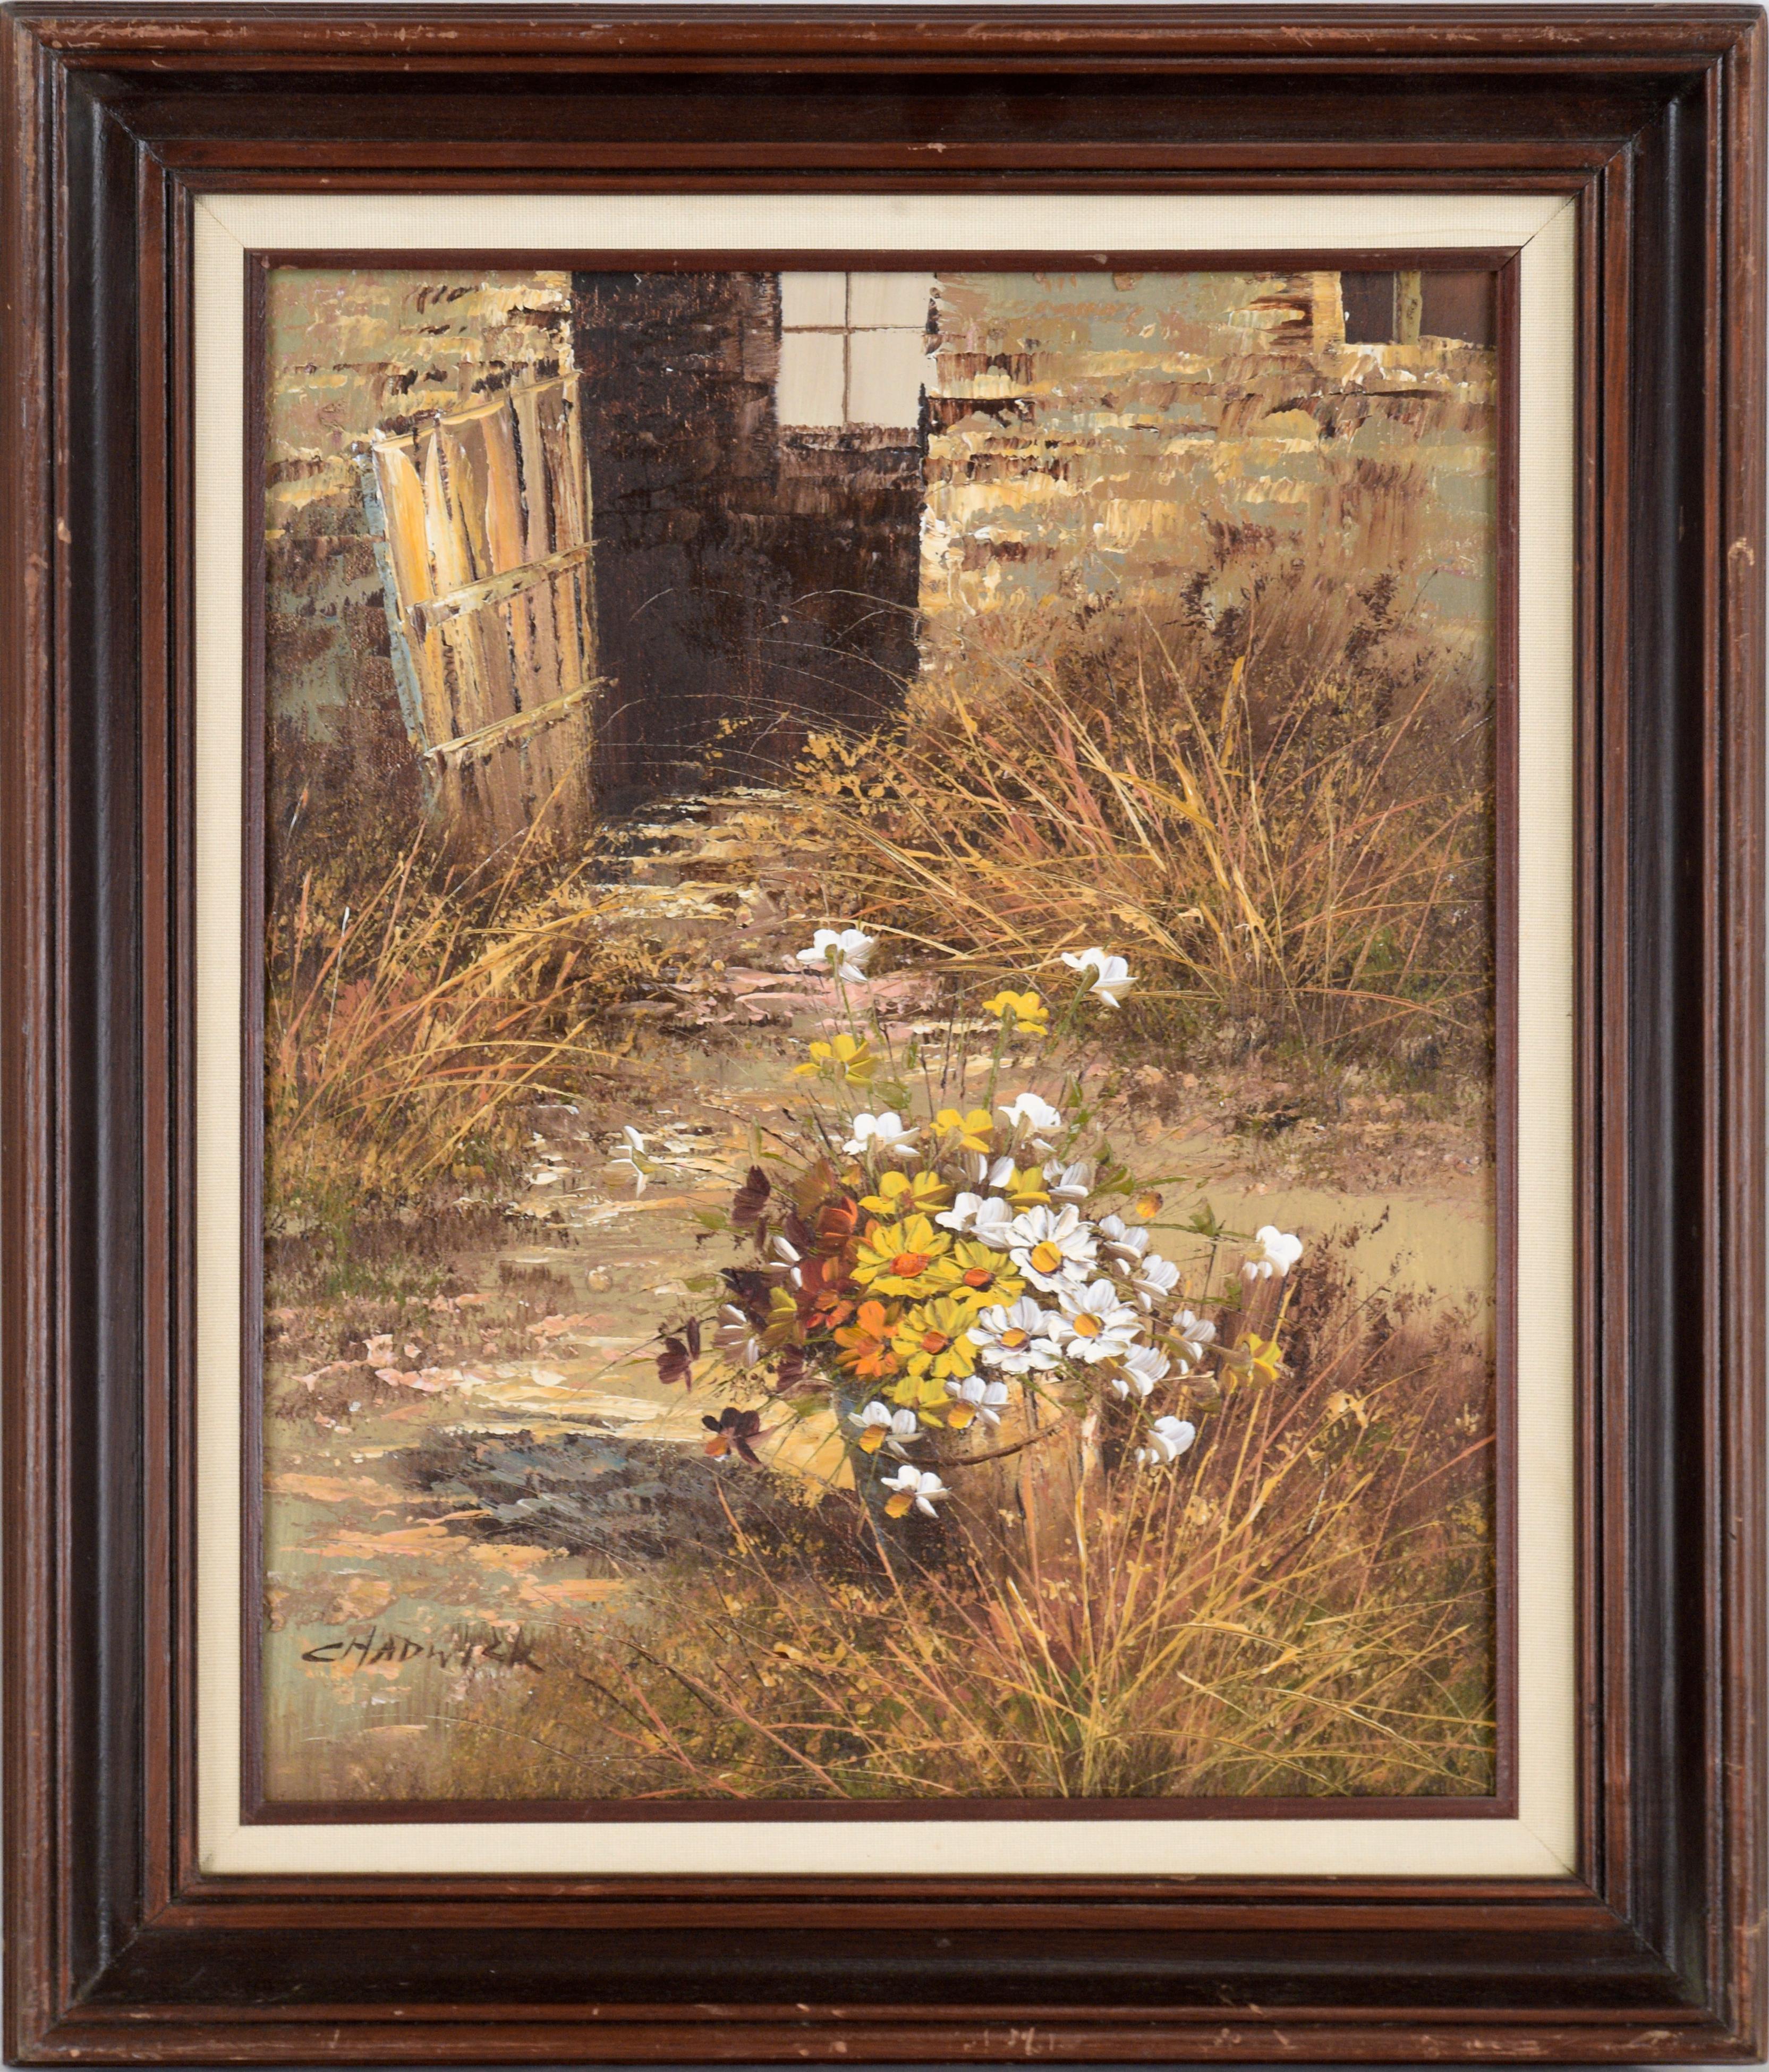 Unknown Still-Life Painting - Daisies by the Back Door - Farm Landscape with Flowers in Oil on Canvas